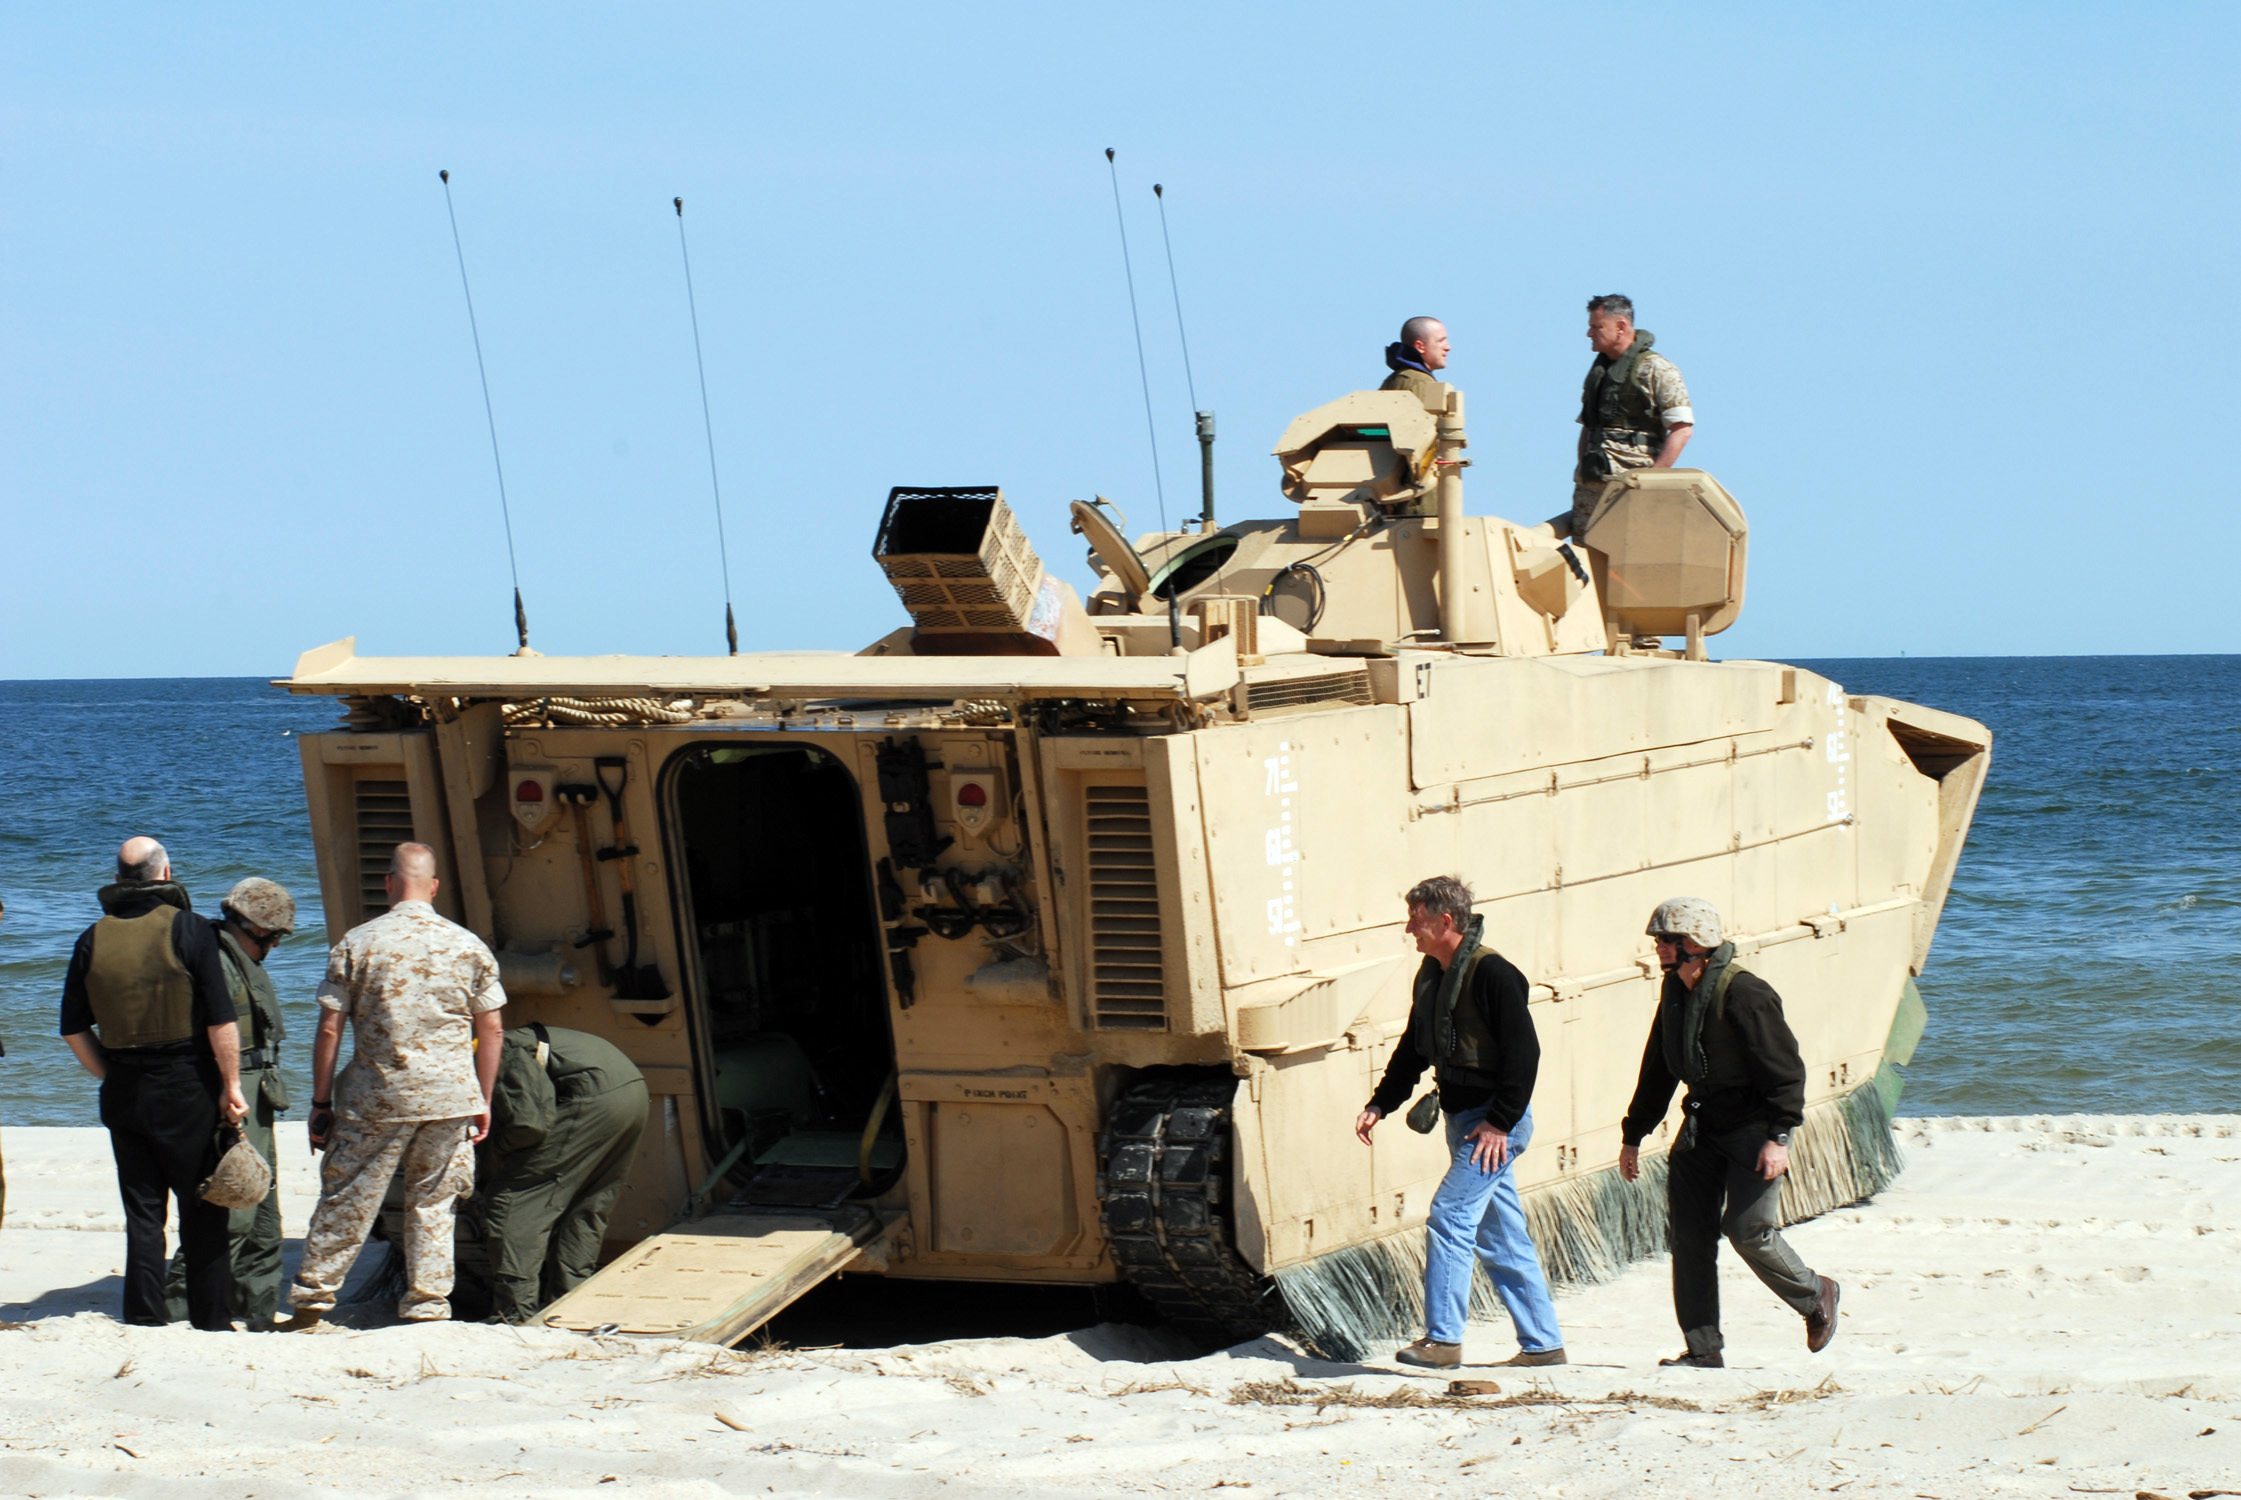 US_Navy_070501-N-7987M-555_Department_of_Defense_personnel_and_Marines_tour_an_Expeditionary_Assault_Vehicle_(EFV)_during_a_capabilities_exercise_at_Naval_Amphibious_Base_Little_Creek.jpg